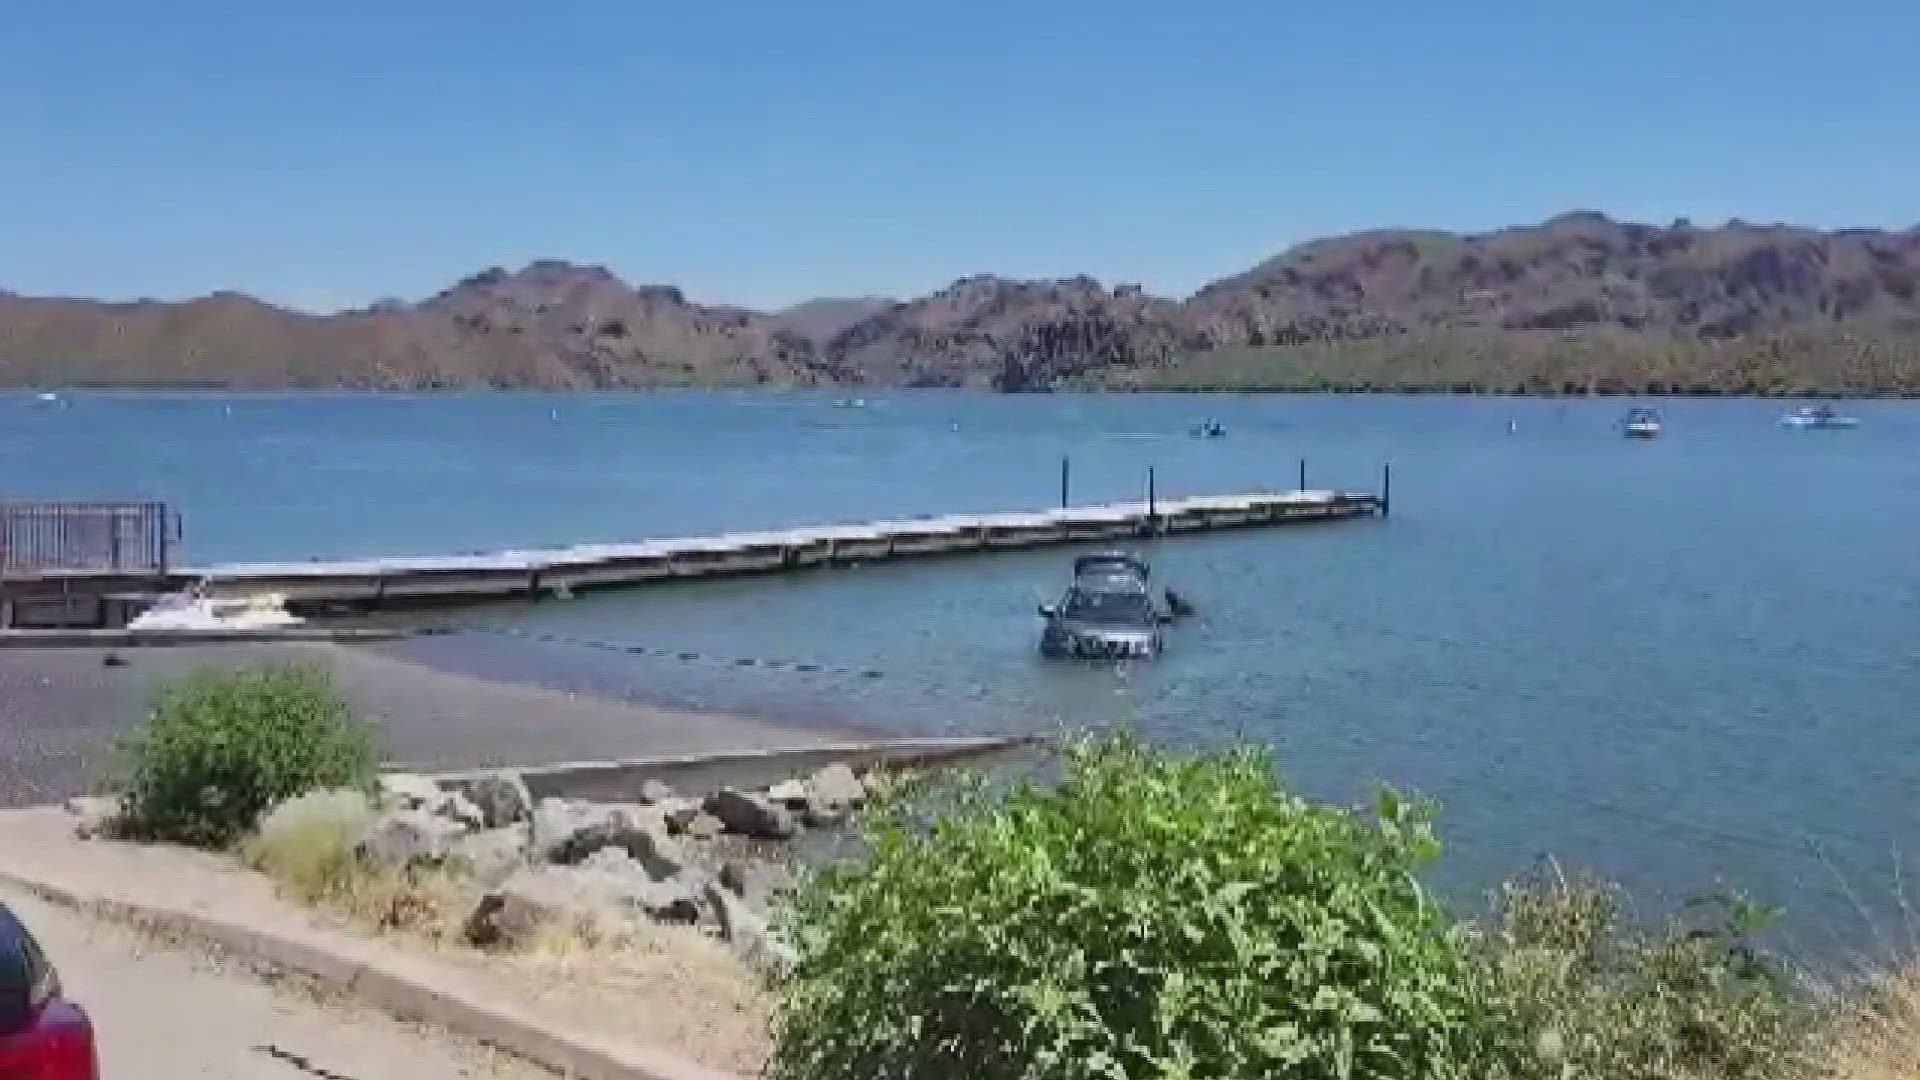 The Maricopa County Sheriff's Office says the drive accidently drove back a little too far while dropping off jet skis.